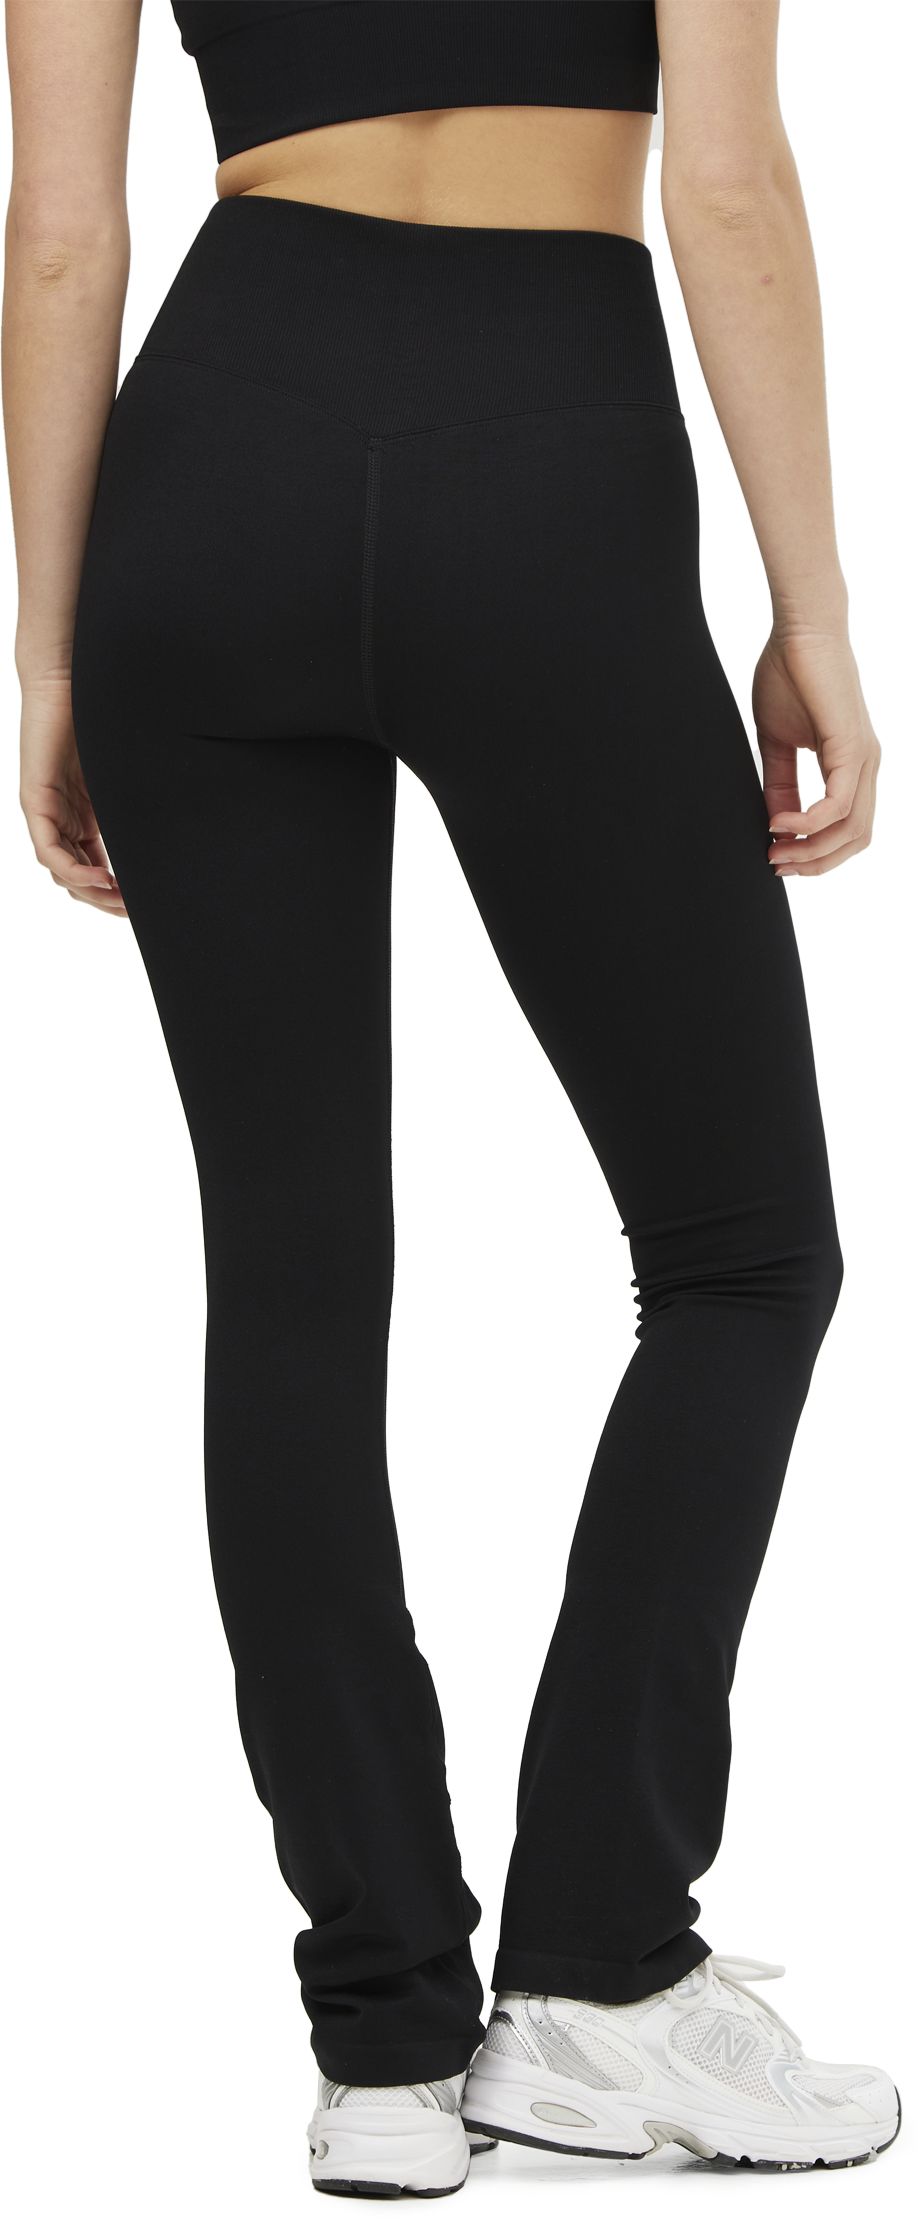 DROP OF MINDFULNESS, ULTIMATE FLARE TIGHTS